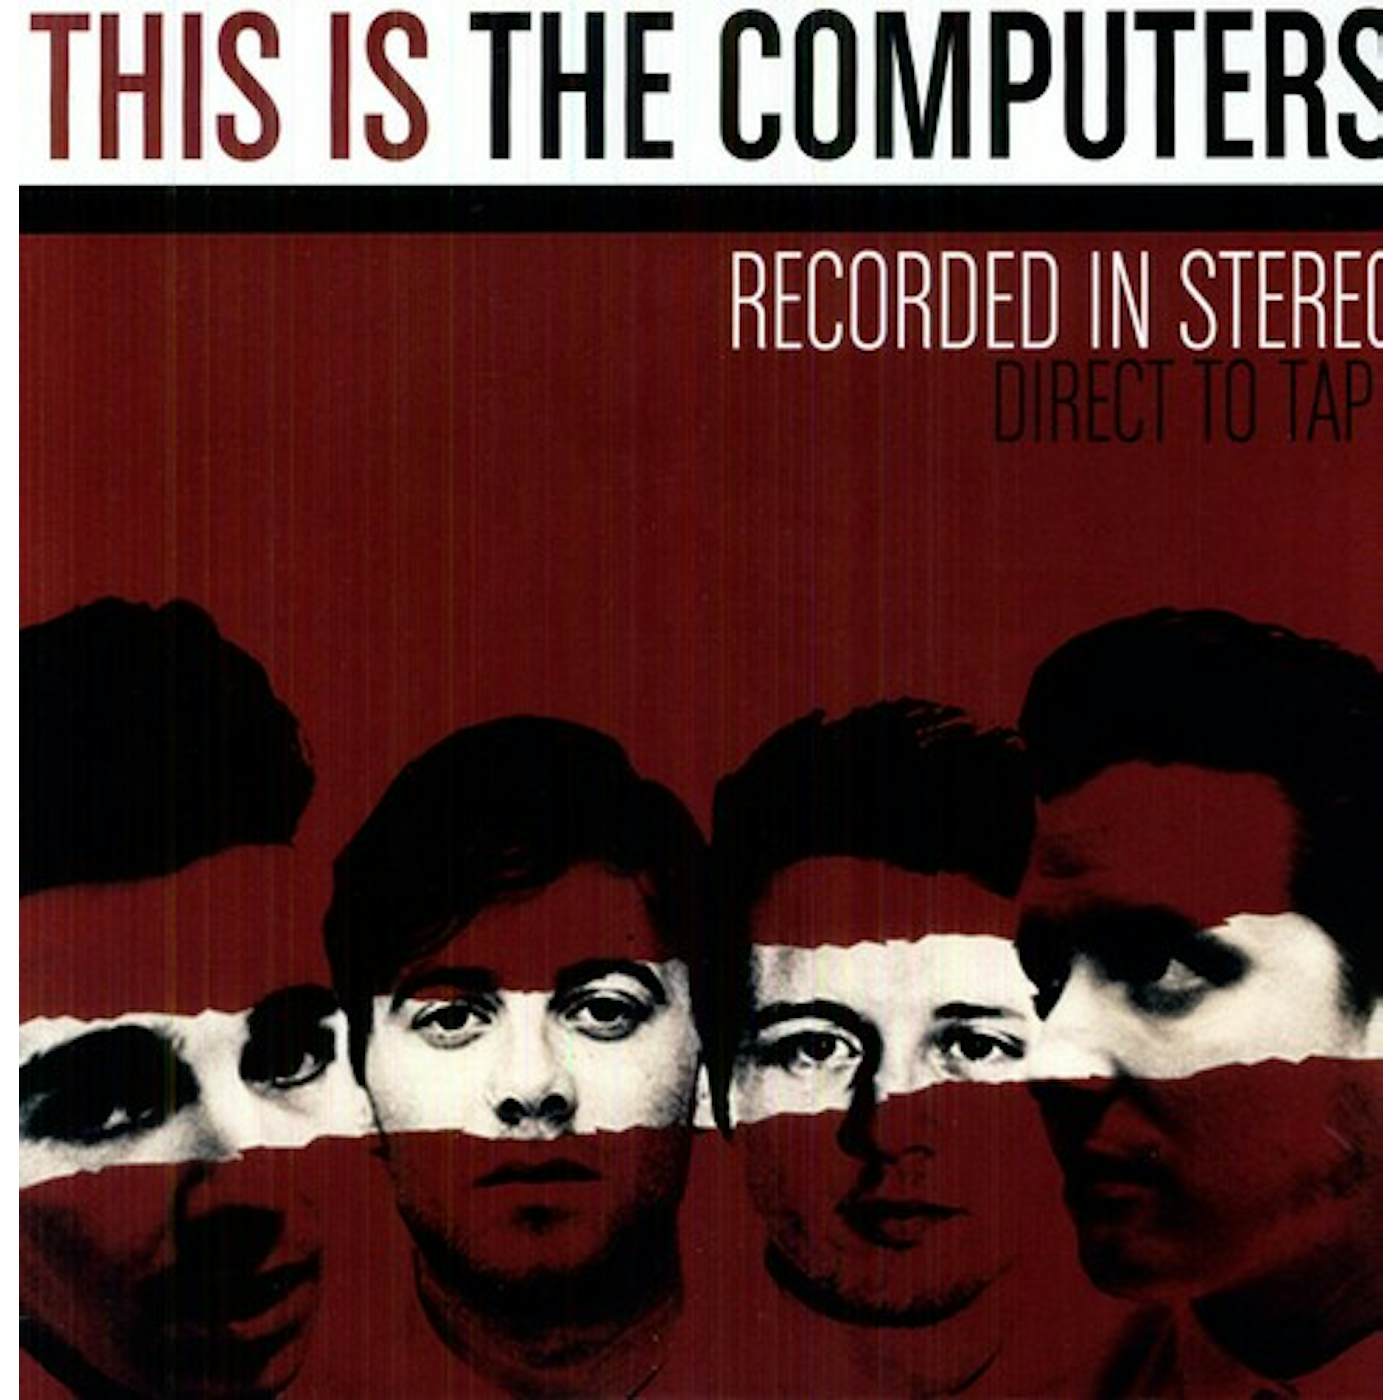 THIS IS THE COMPUTERS Vinyl Record